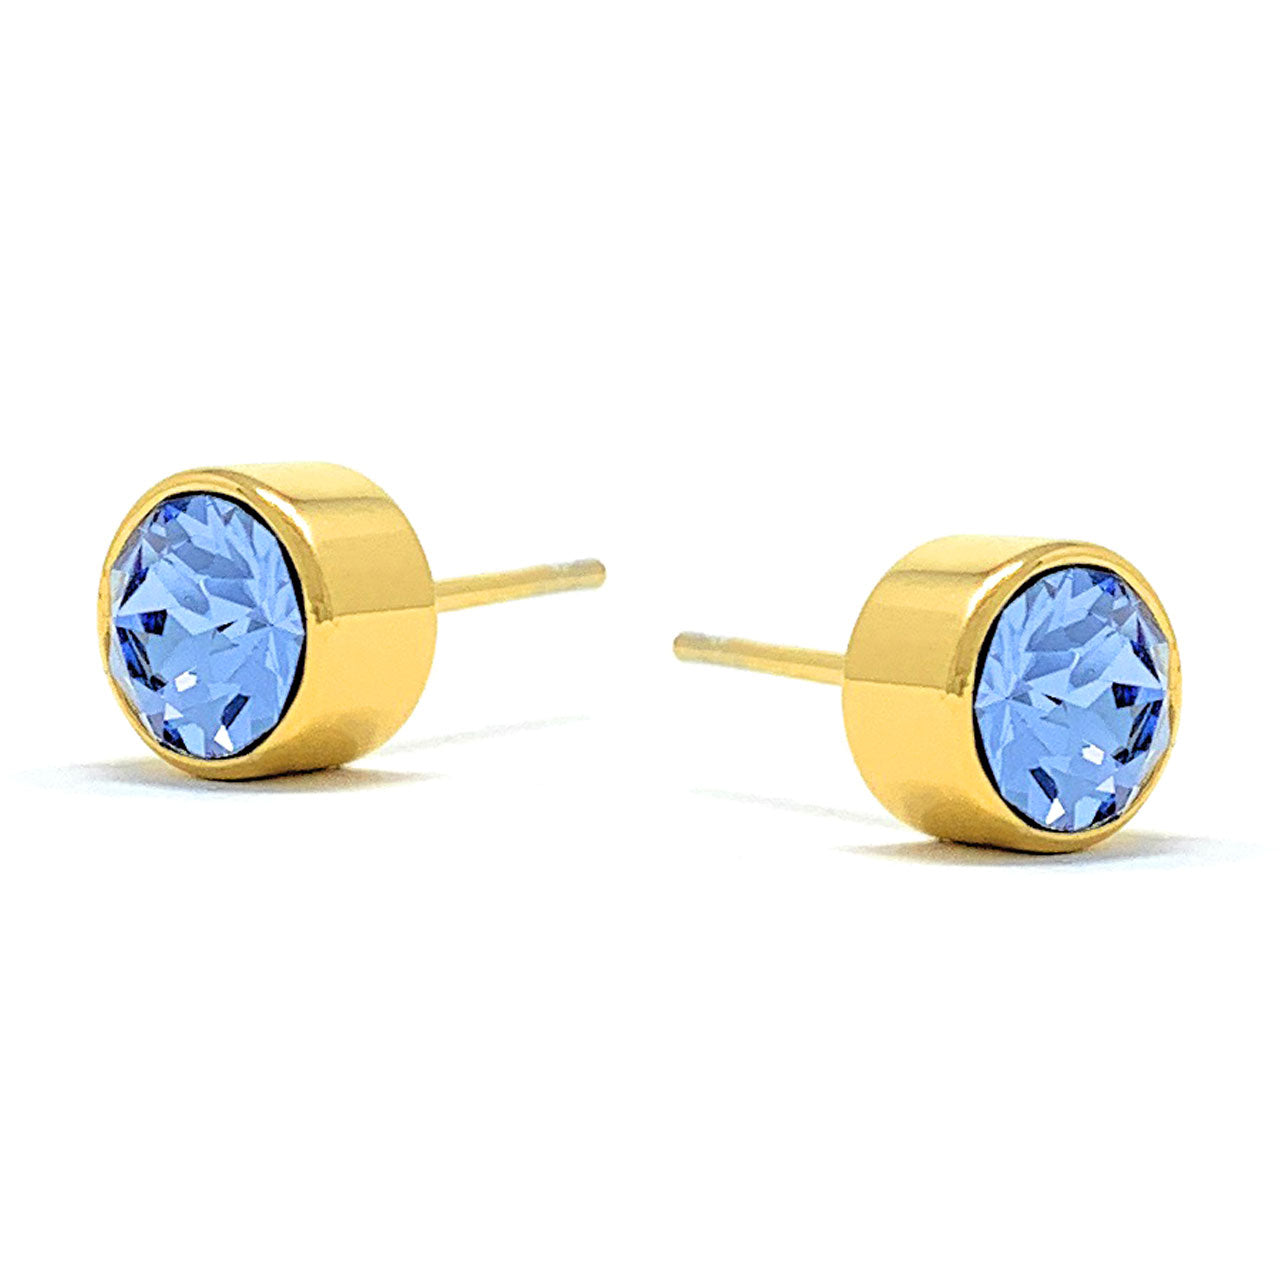 Harley Small Stud Earrings with Blue Light Sapphire Round Crystals from Swarovski Gold Plated - Ed Heart